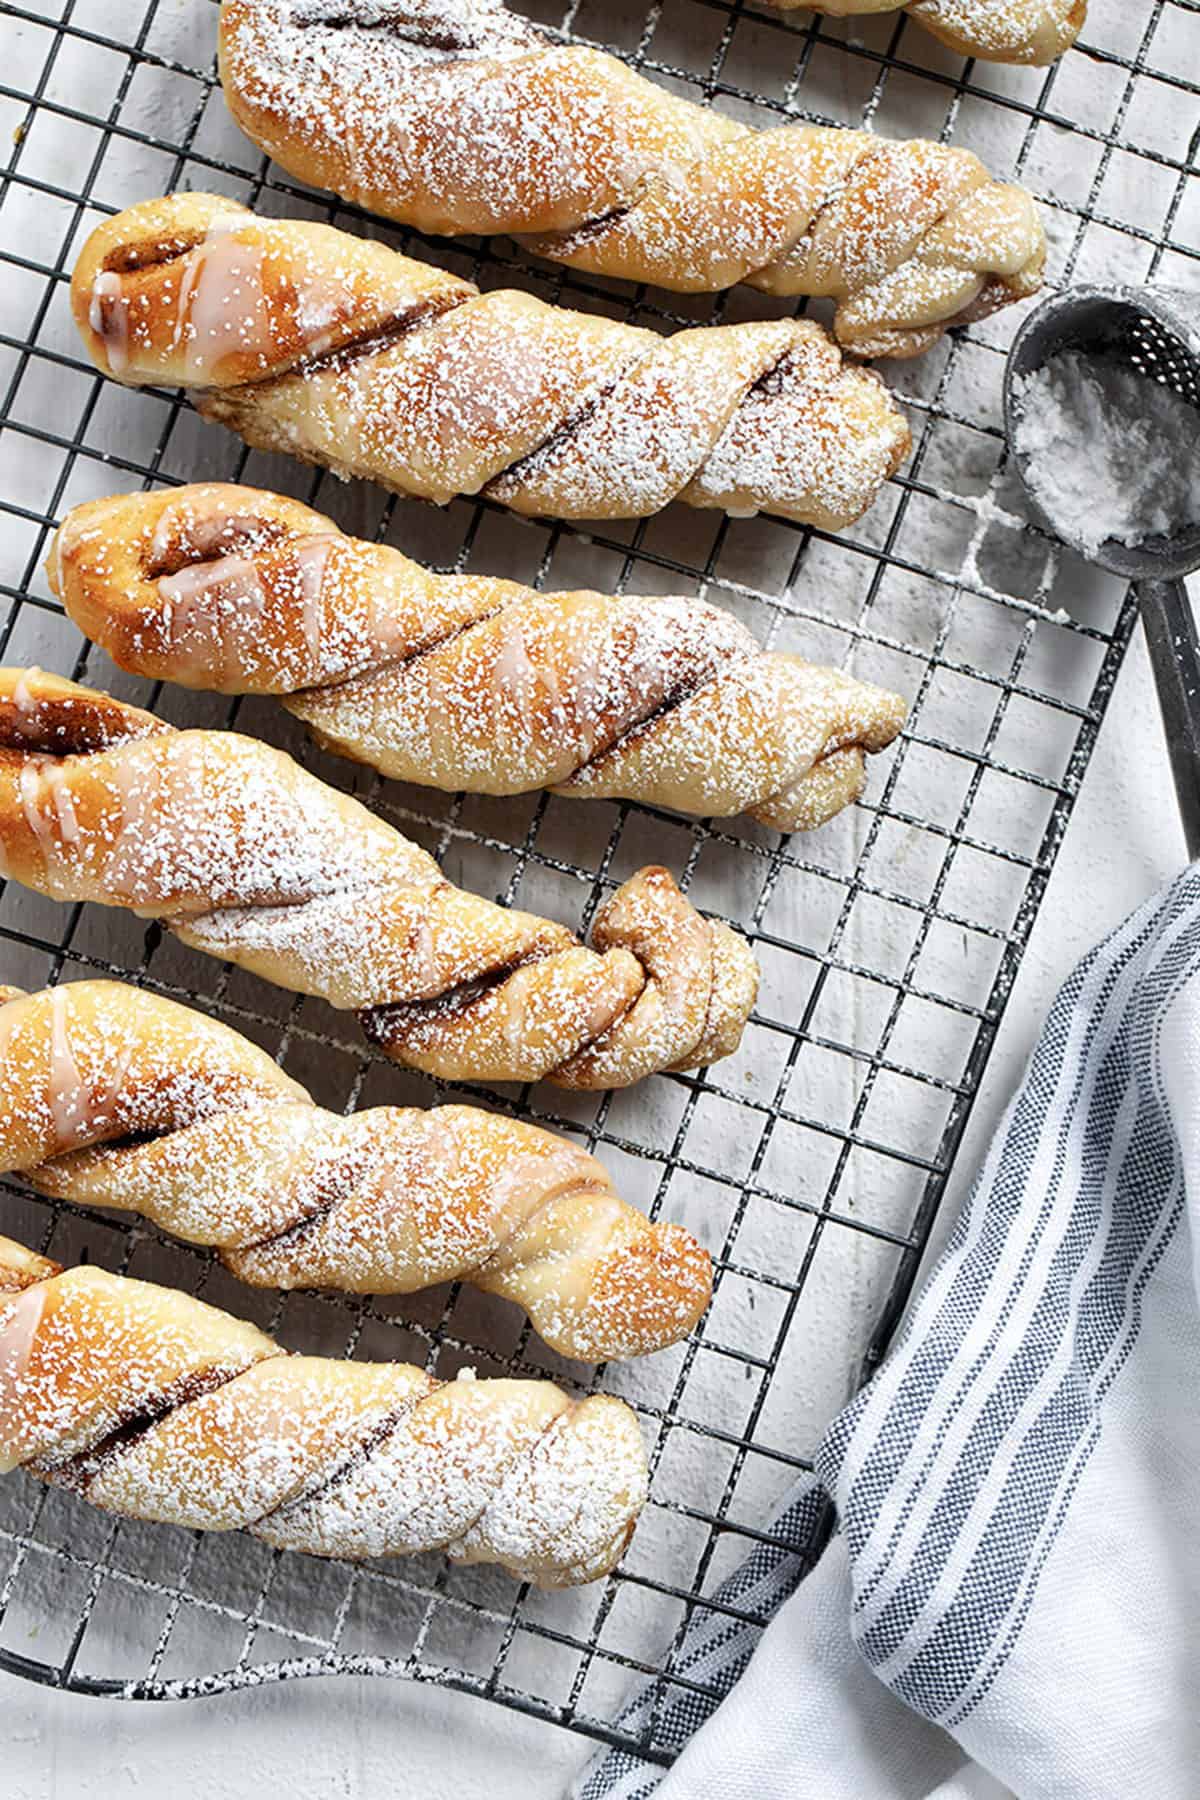 cinnamon twists lined up on a cooling rack in portrait view